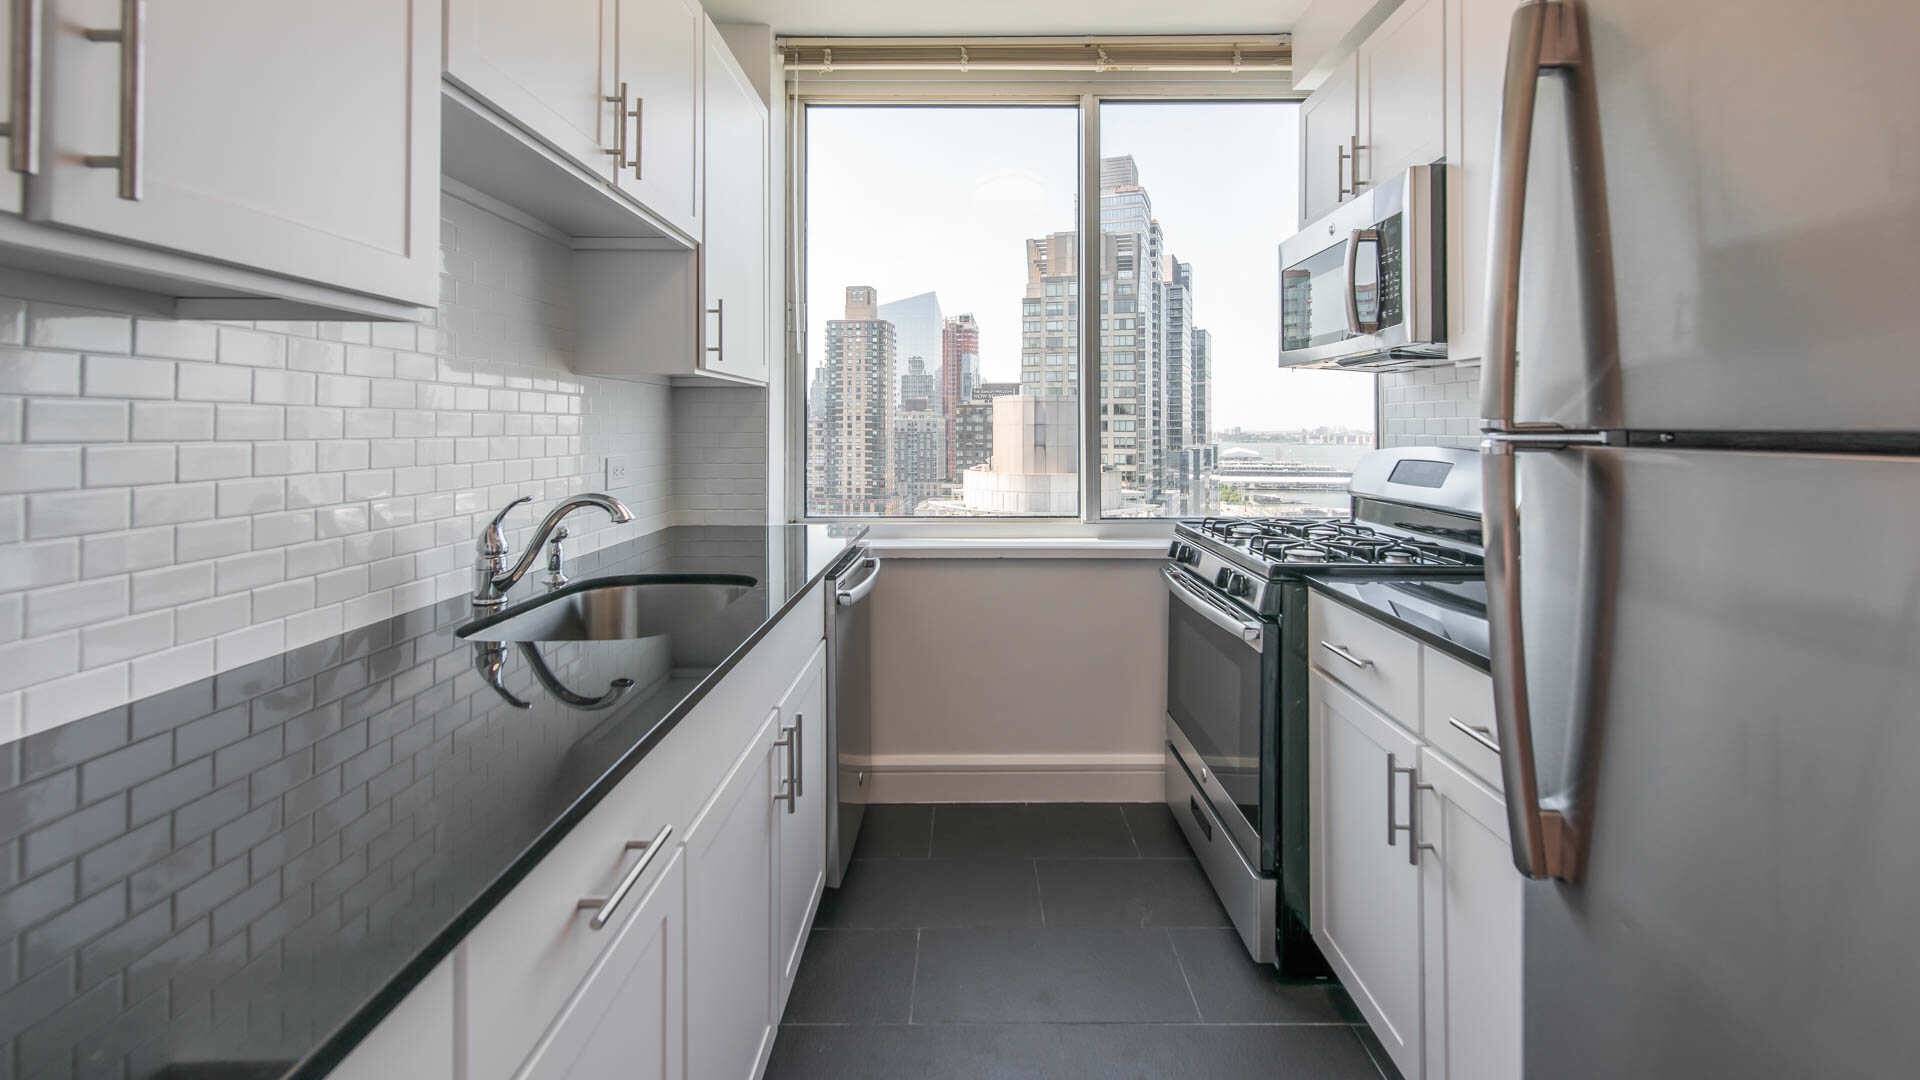 This 1 Bedroom Upper West Side Apartment has BREATHTAKING Hudson River Views!! With Access to Award Winning Schools, Restaurants, and Lincoln Center!!!!